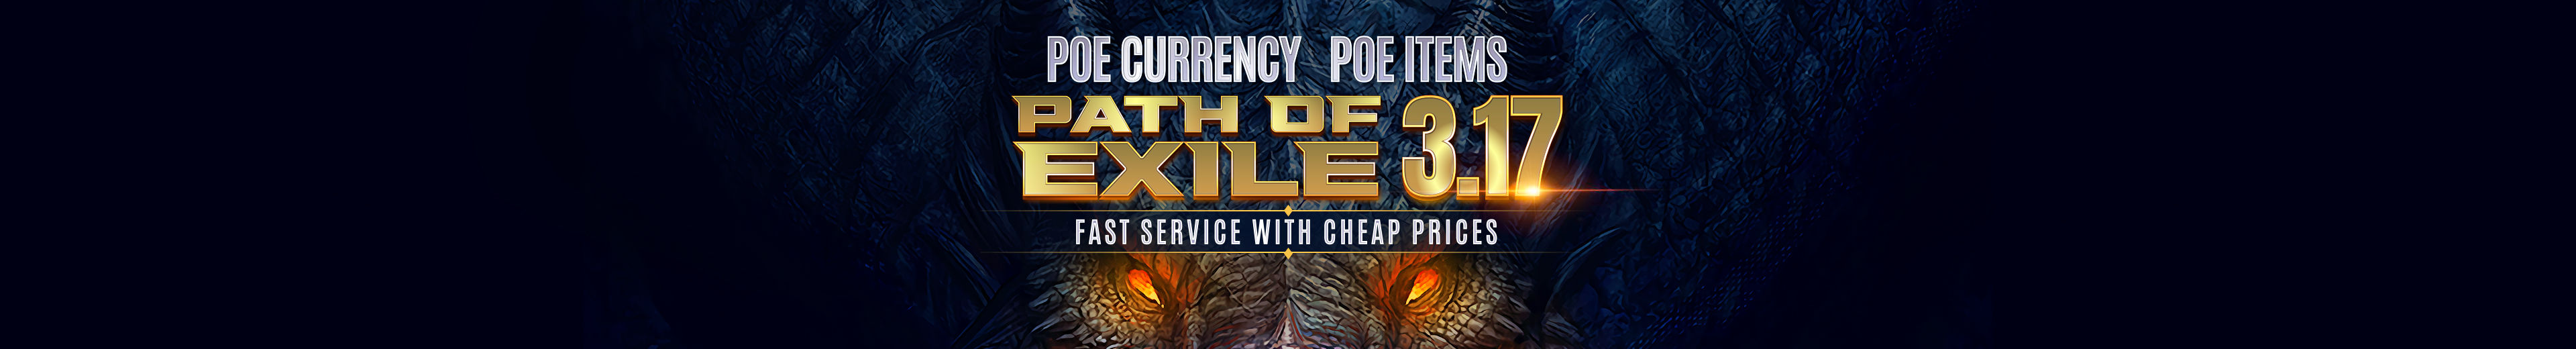 Buy POE Currency Now